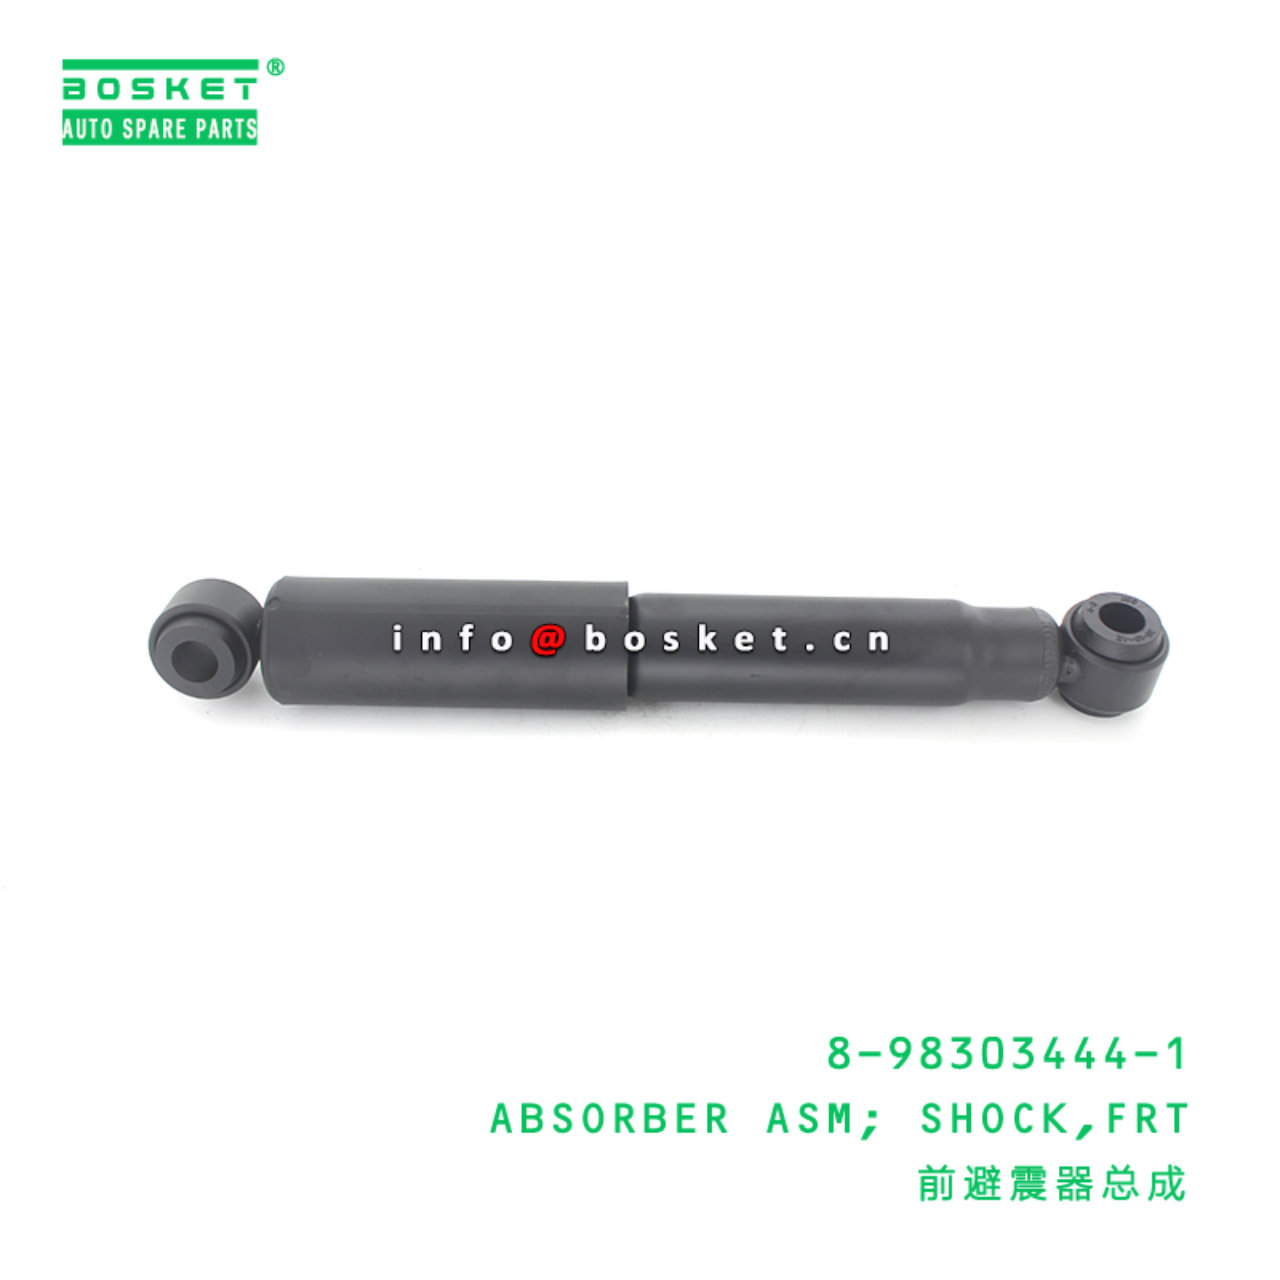 8-98303444-1 Front Shock Absorber Assembly Suitable for ISUZU NPR 8983034441